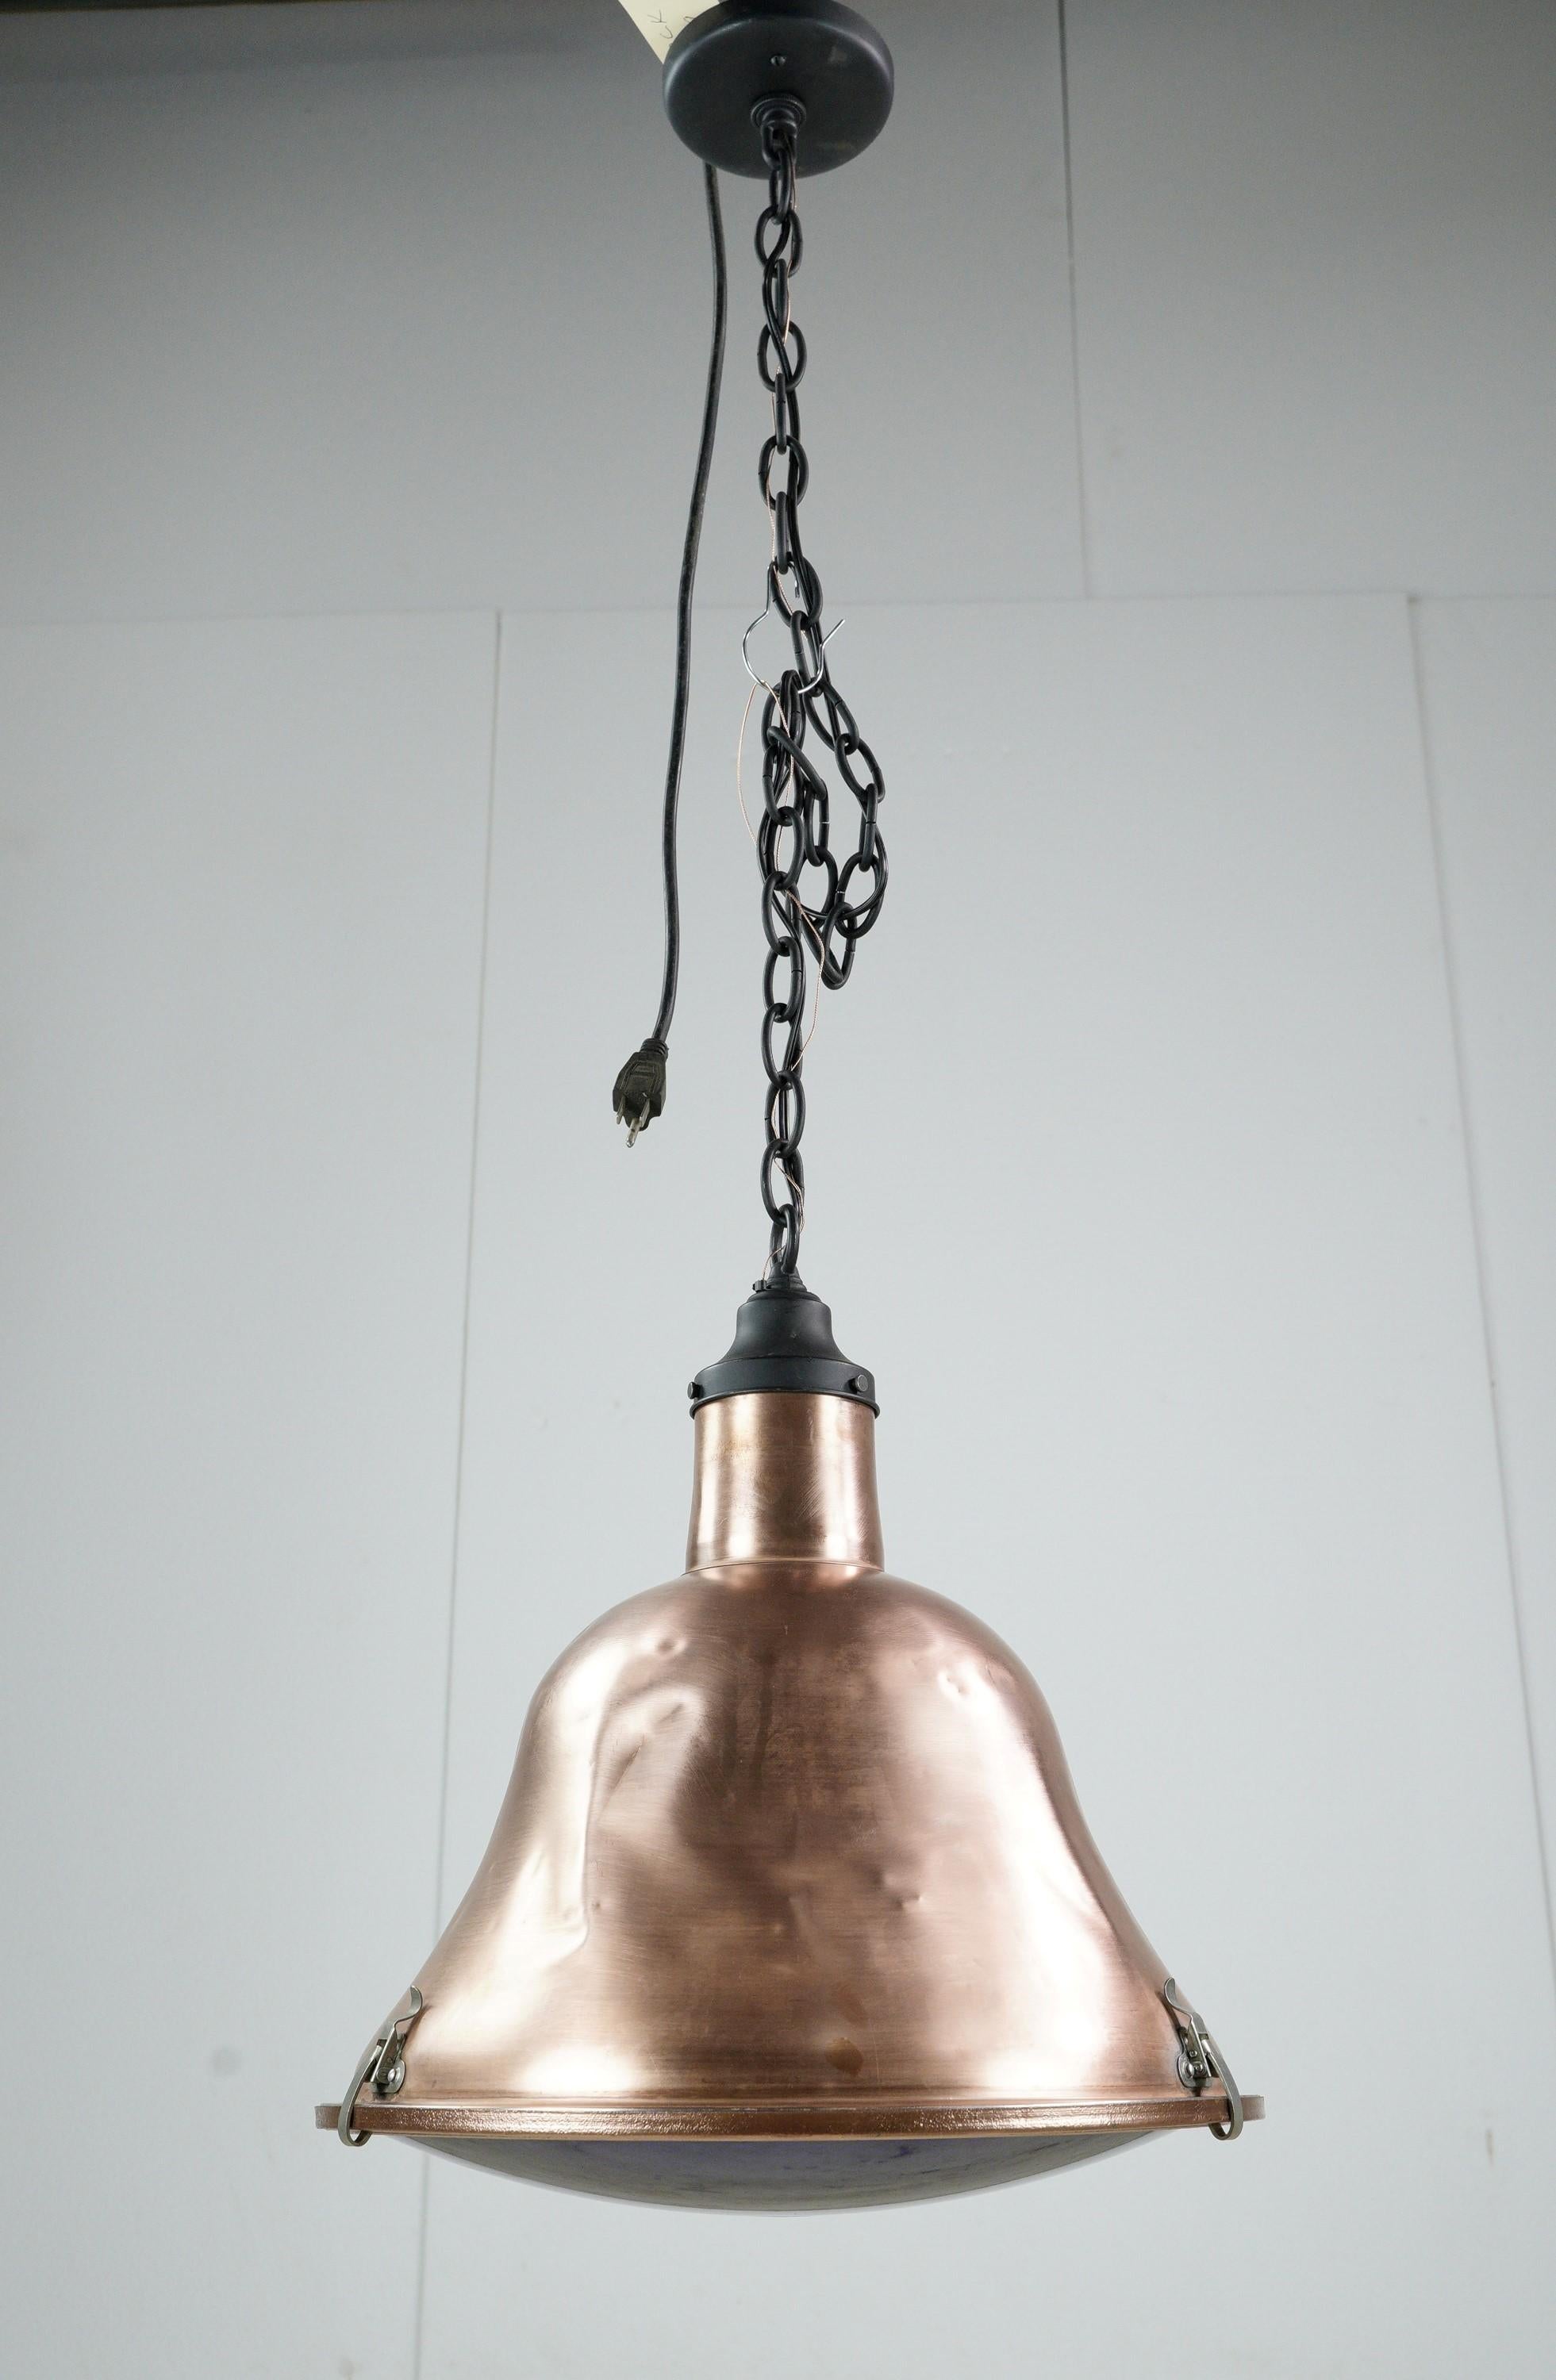 Reclaimed copper pendant light with a blackened brass frame and steel chain. Cleaned and restored. They are in good condition. The price includes restoration of cleaning and rewiring. Small quantity available at time of posting. Please inquire.